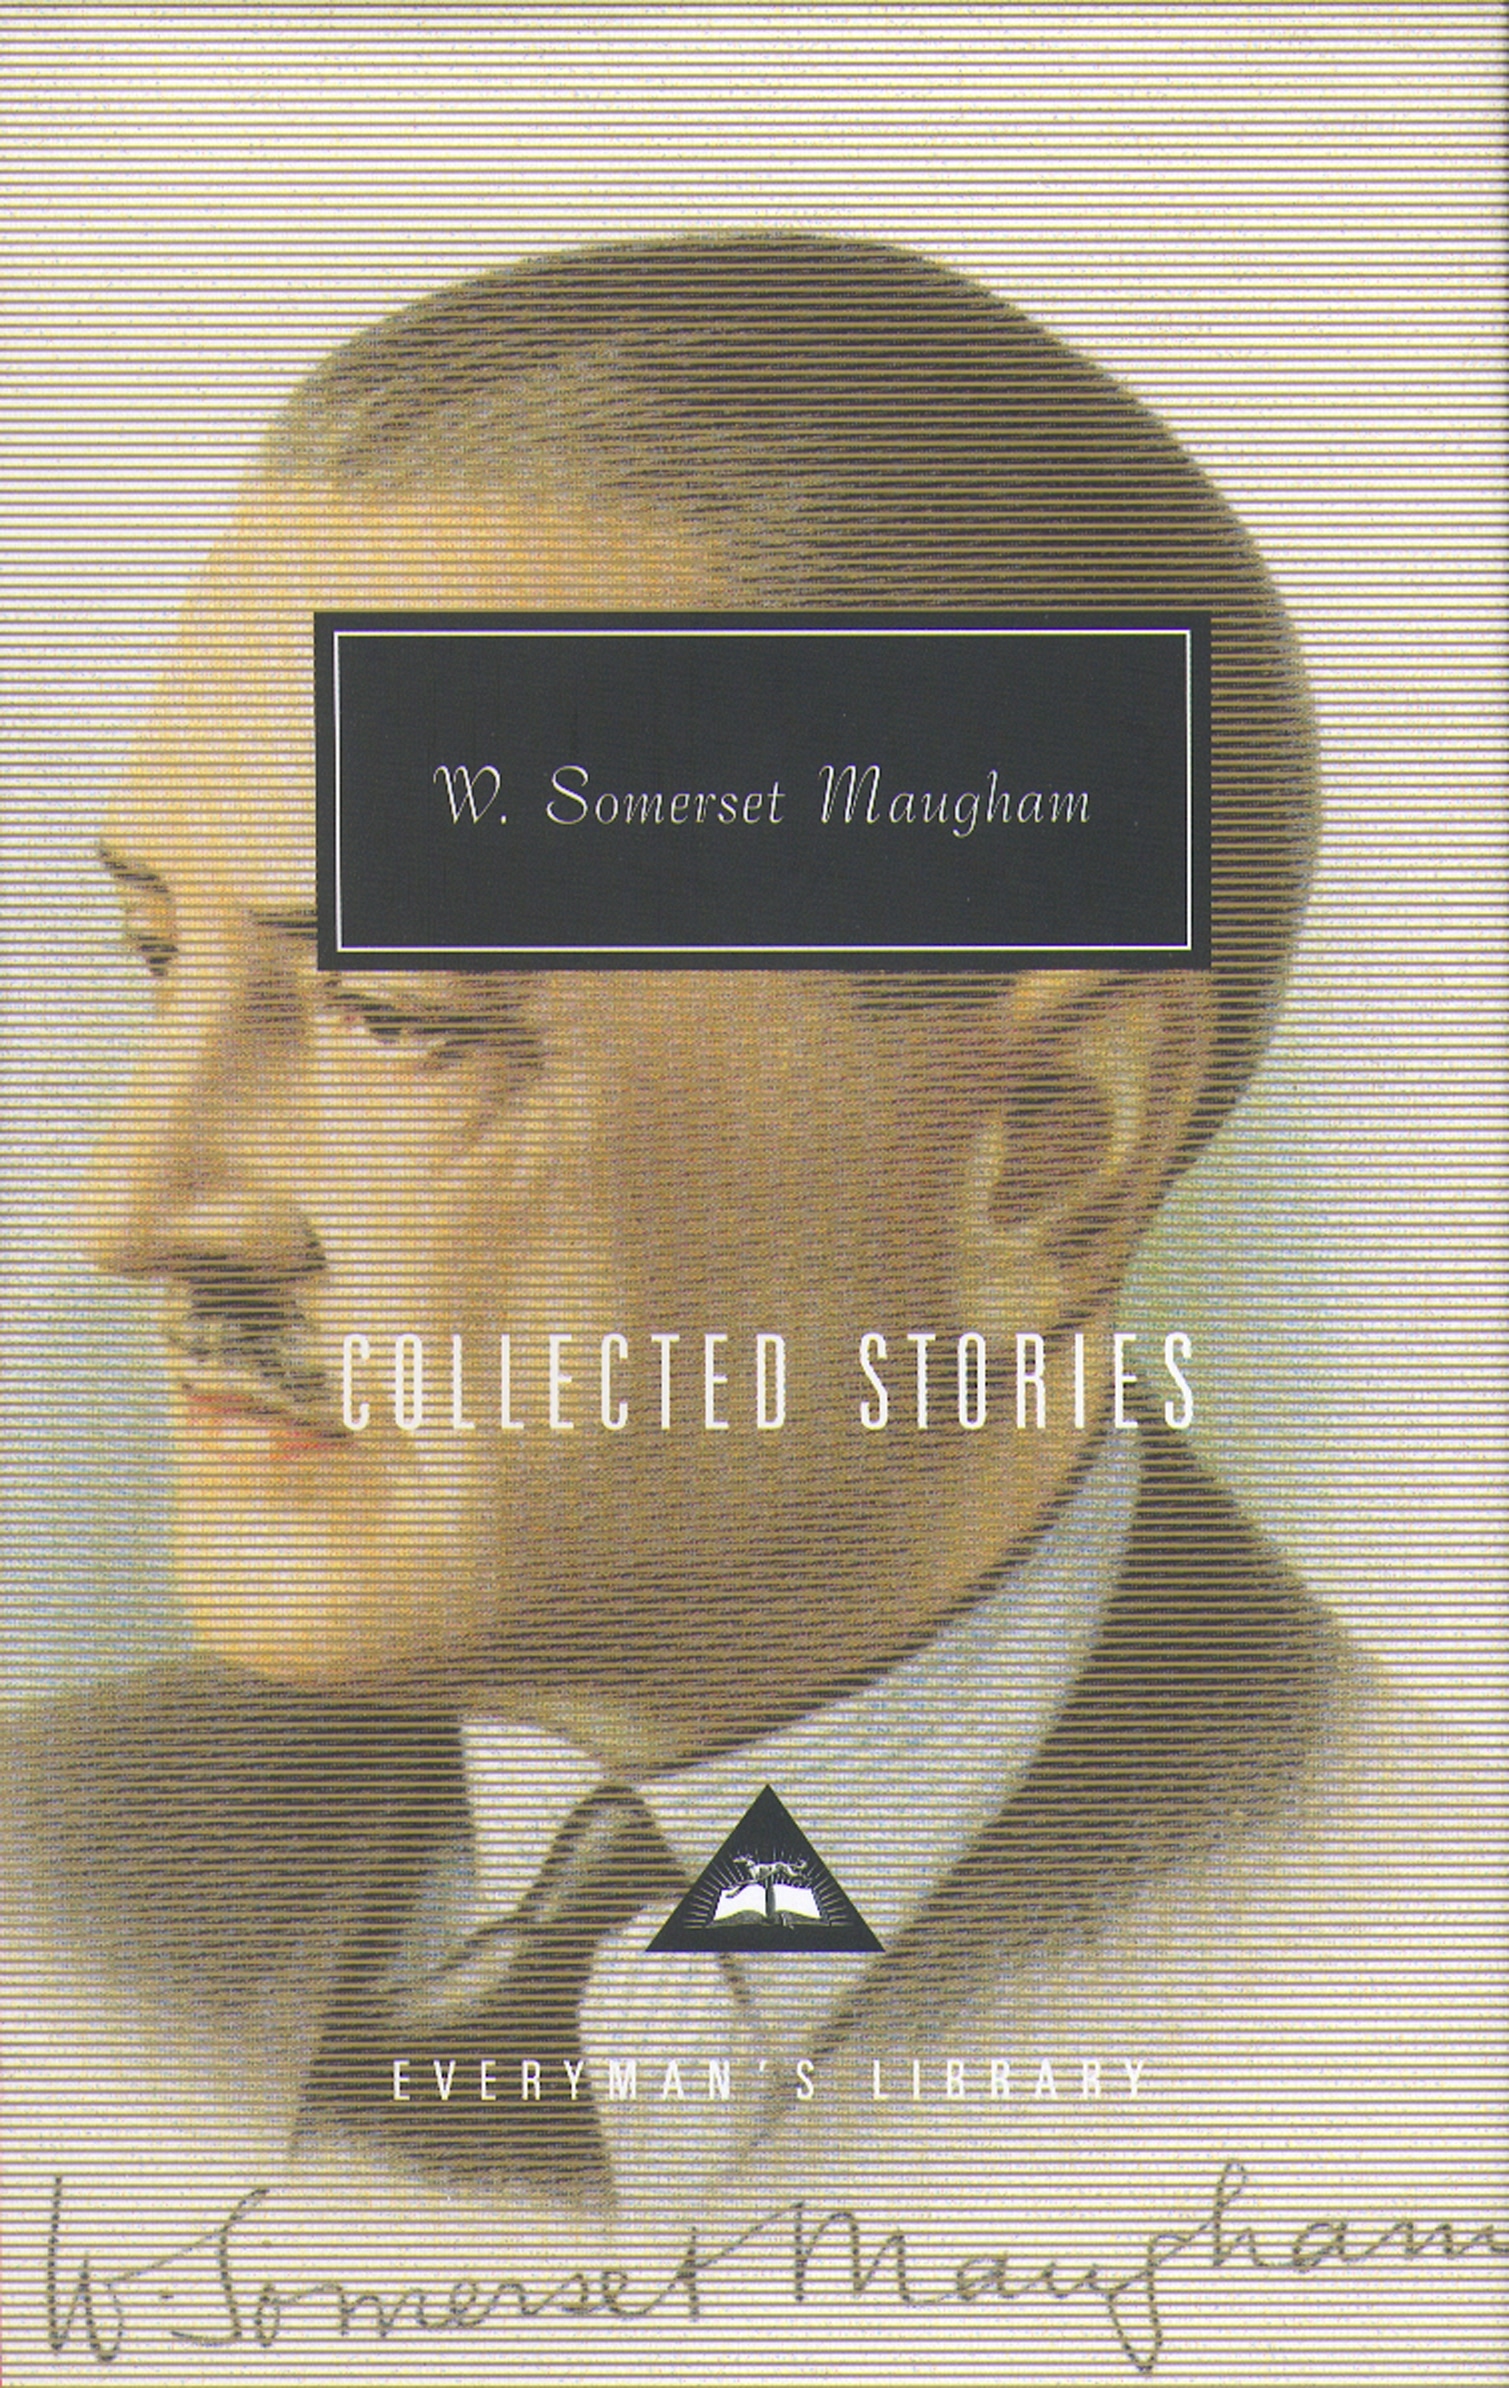 Book “Collected Stories” by W. Somerset Maugham — August 5, 2004